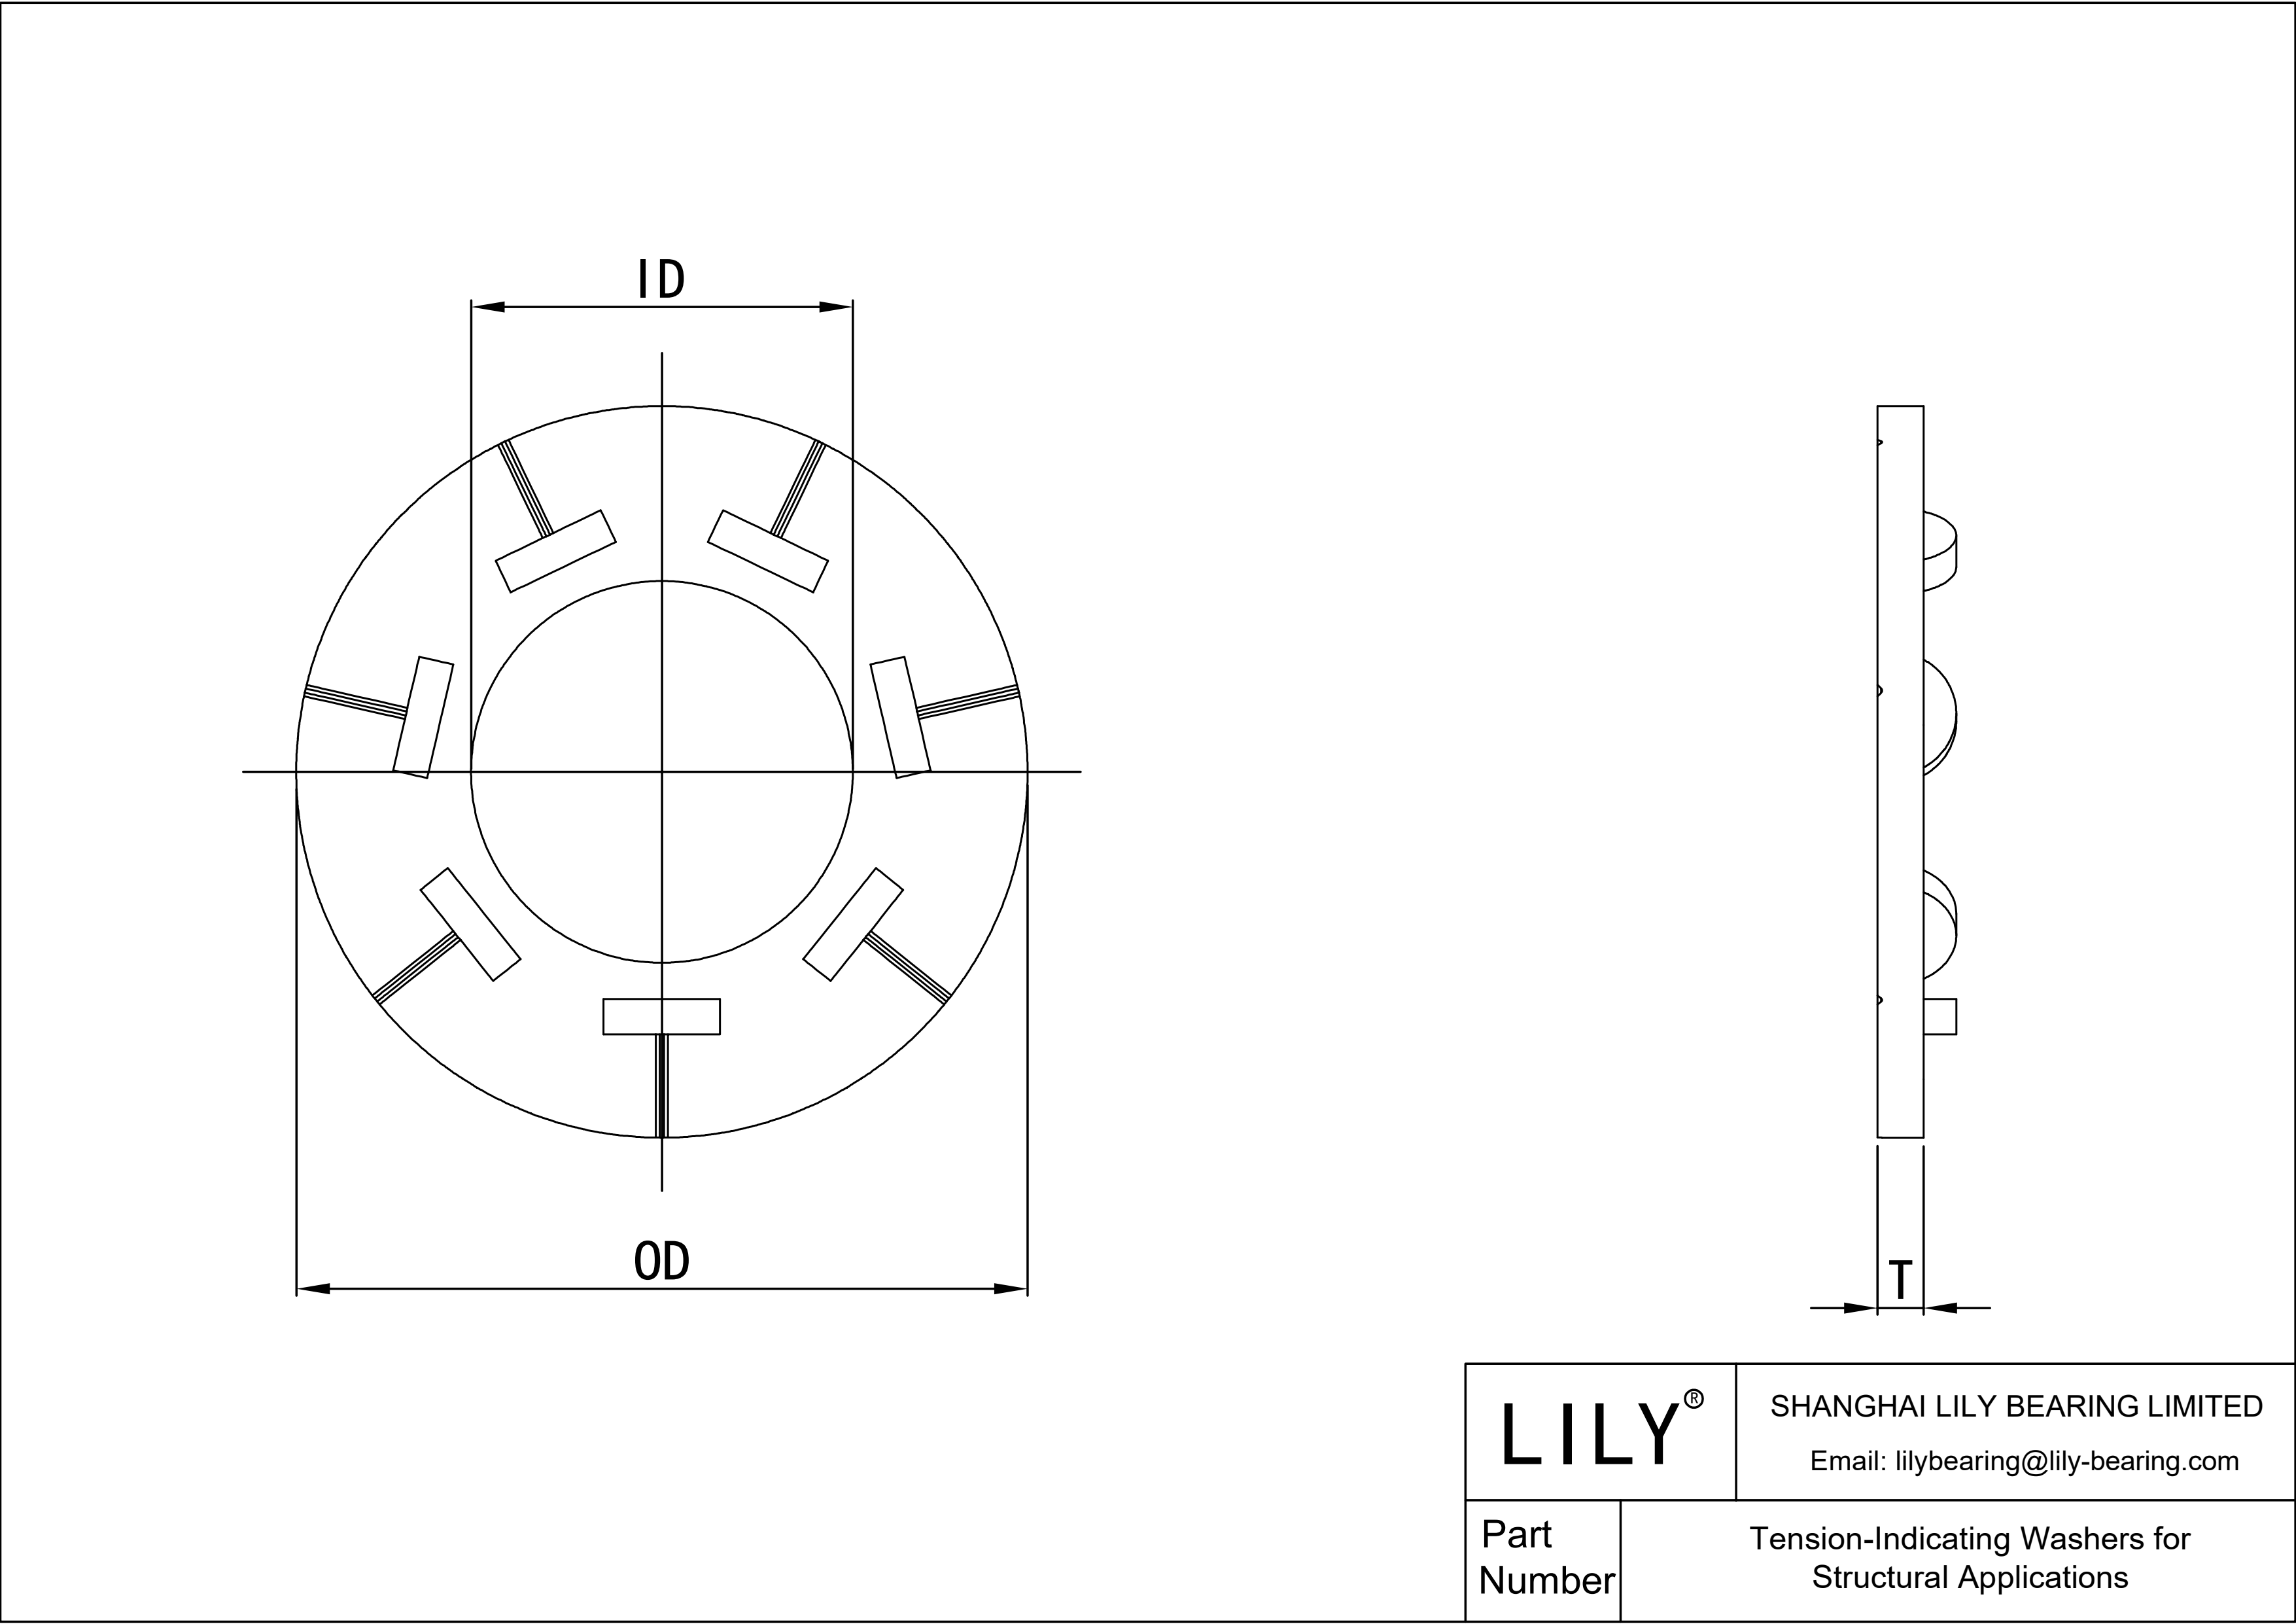 JFDEIABCF Tension-Indicating Washers for Structural Applications cad drawing